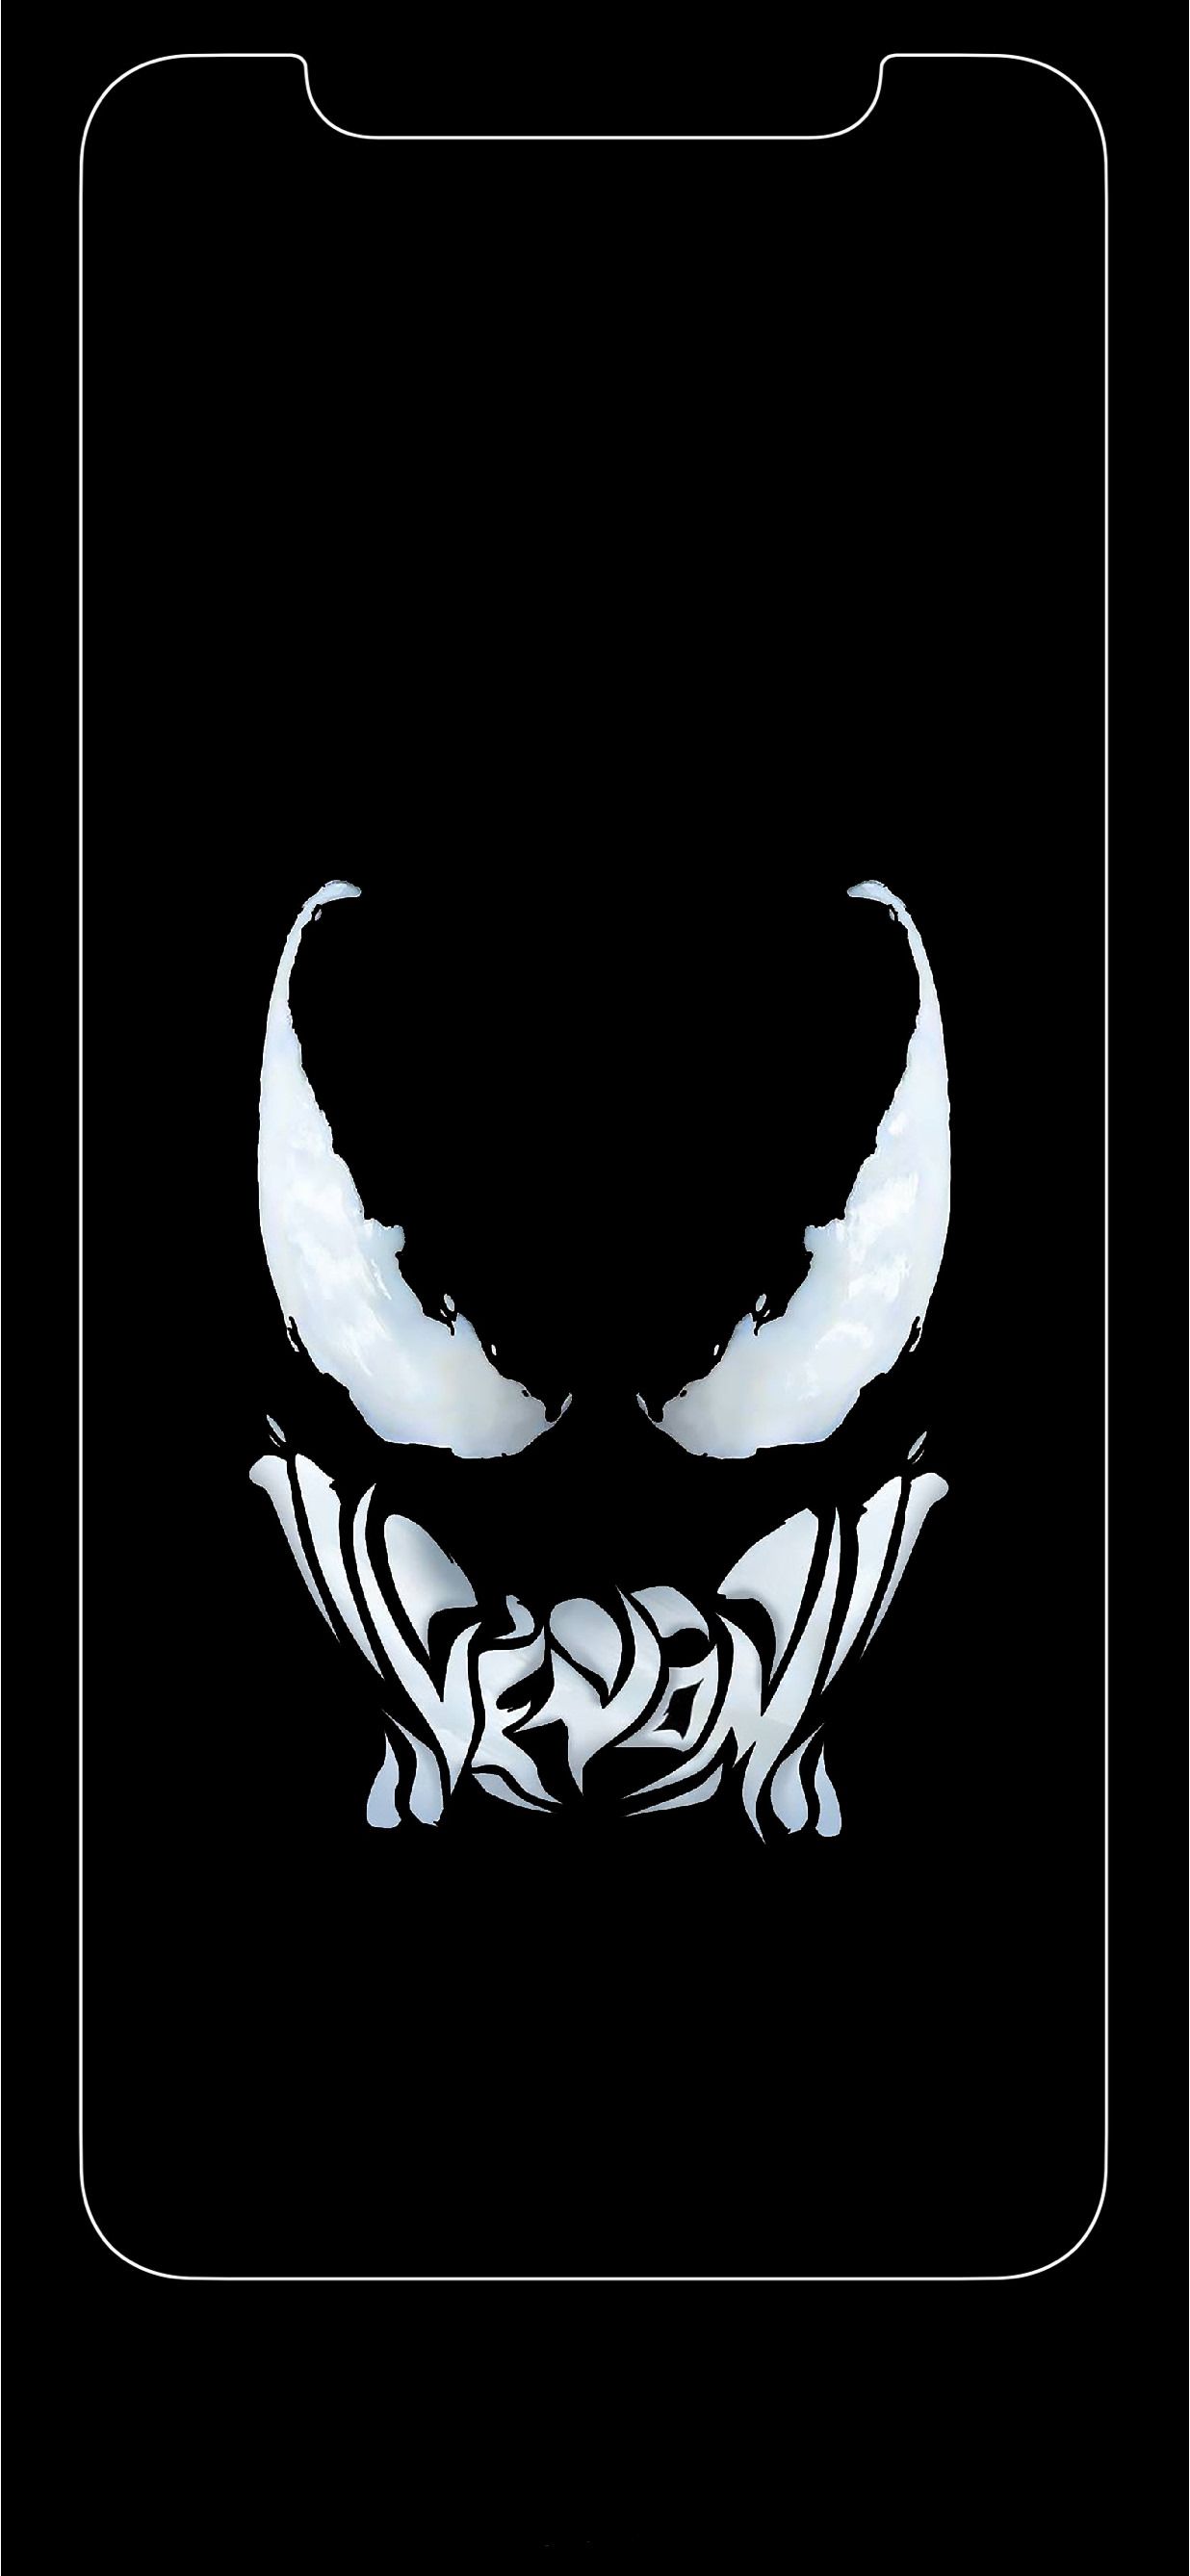 Maybe I like the borders too much. Here are two Venom wallpaper mixed with the borders for iPhone X [1235x2677]